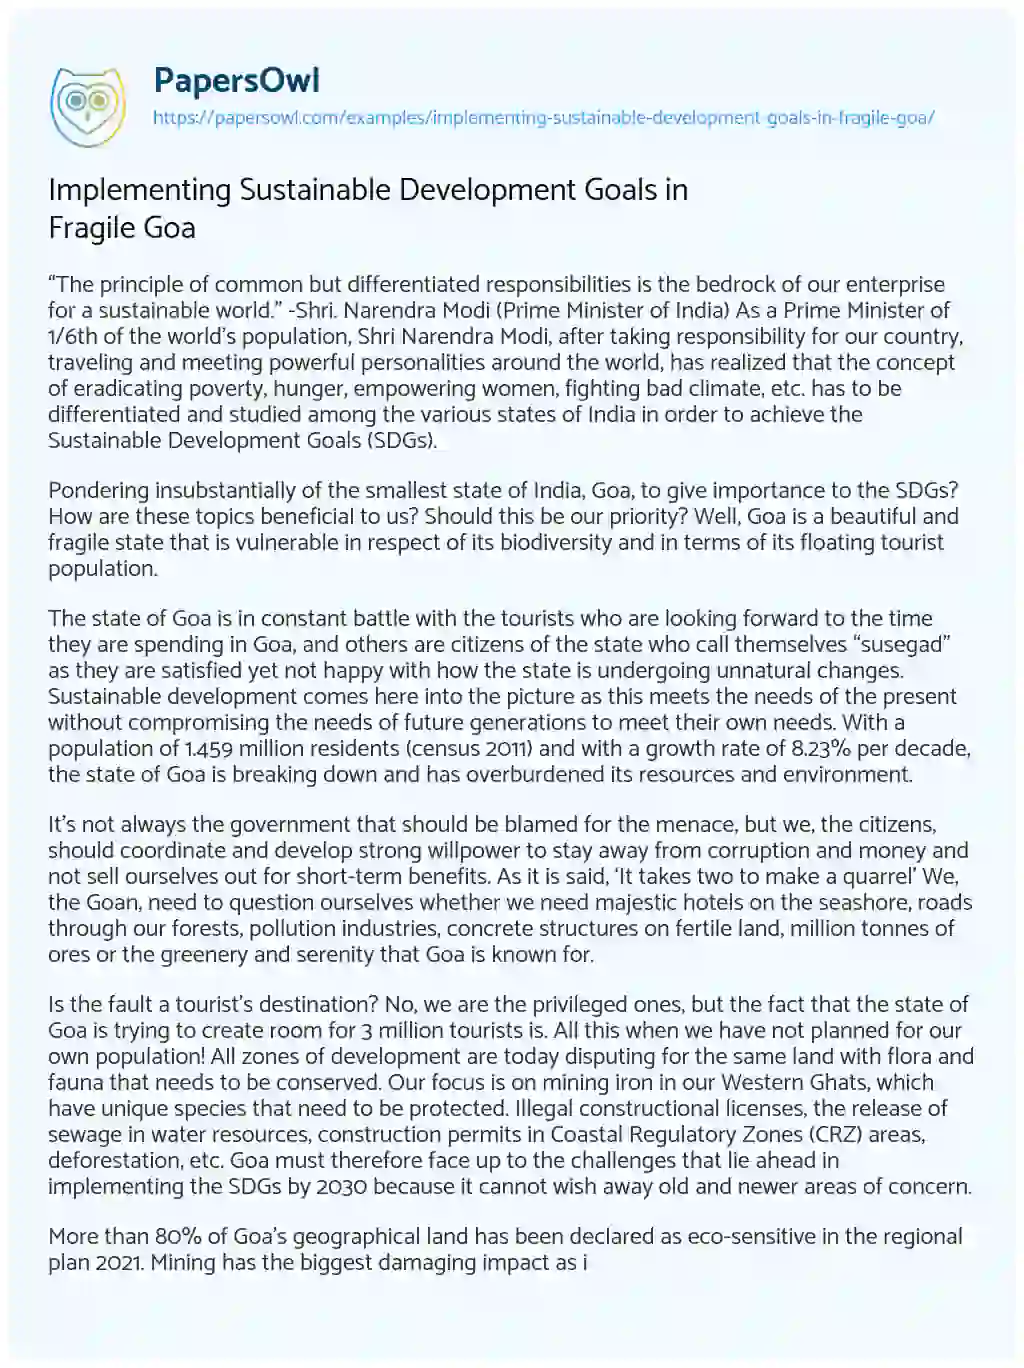 Essay on Implementing Sustainable Development Goals in Fragile Goa